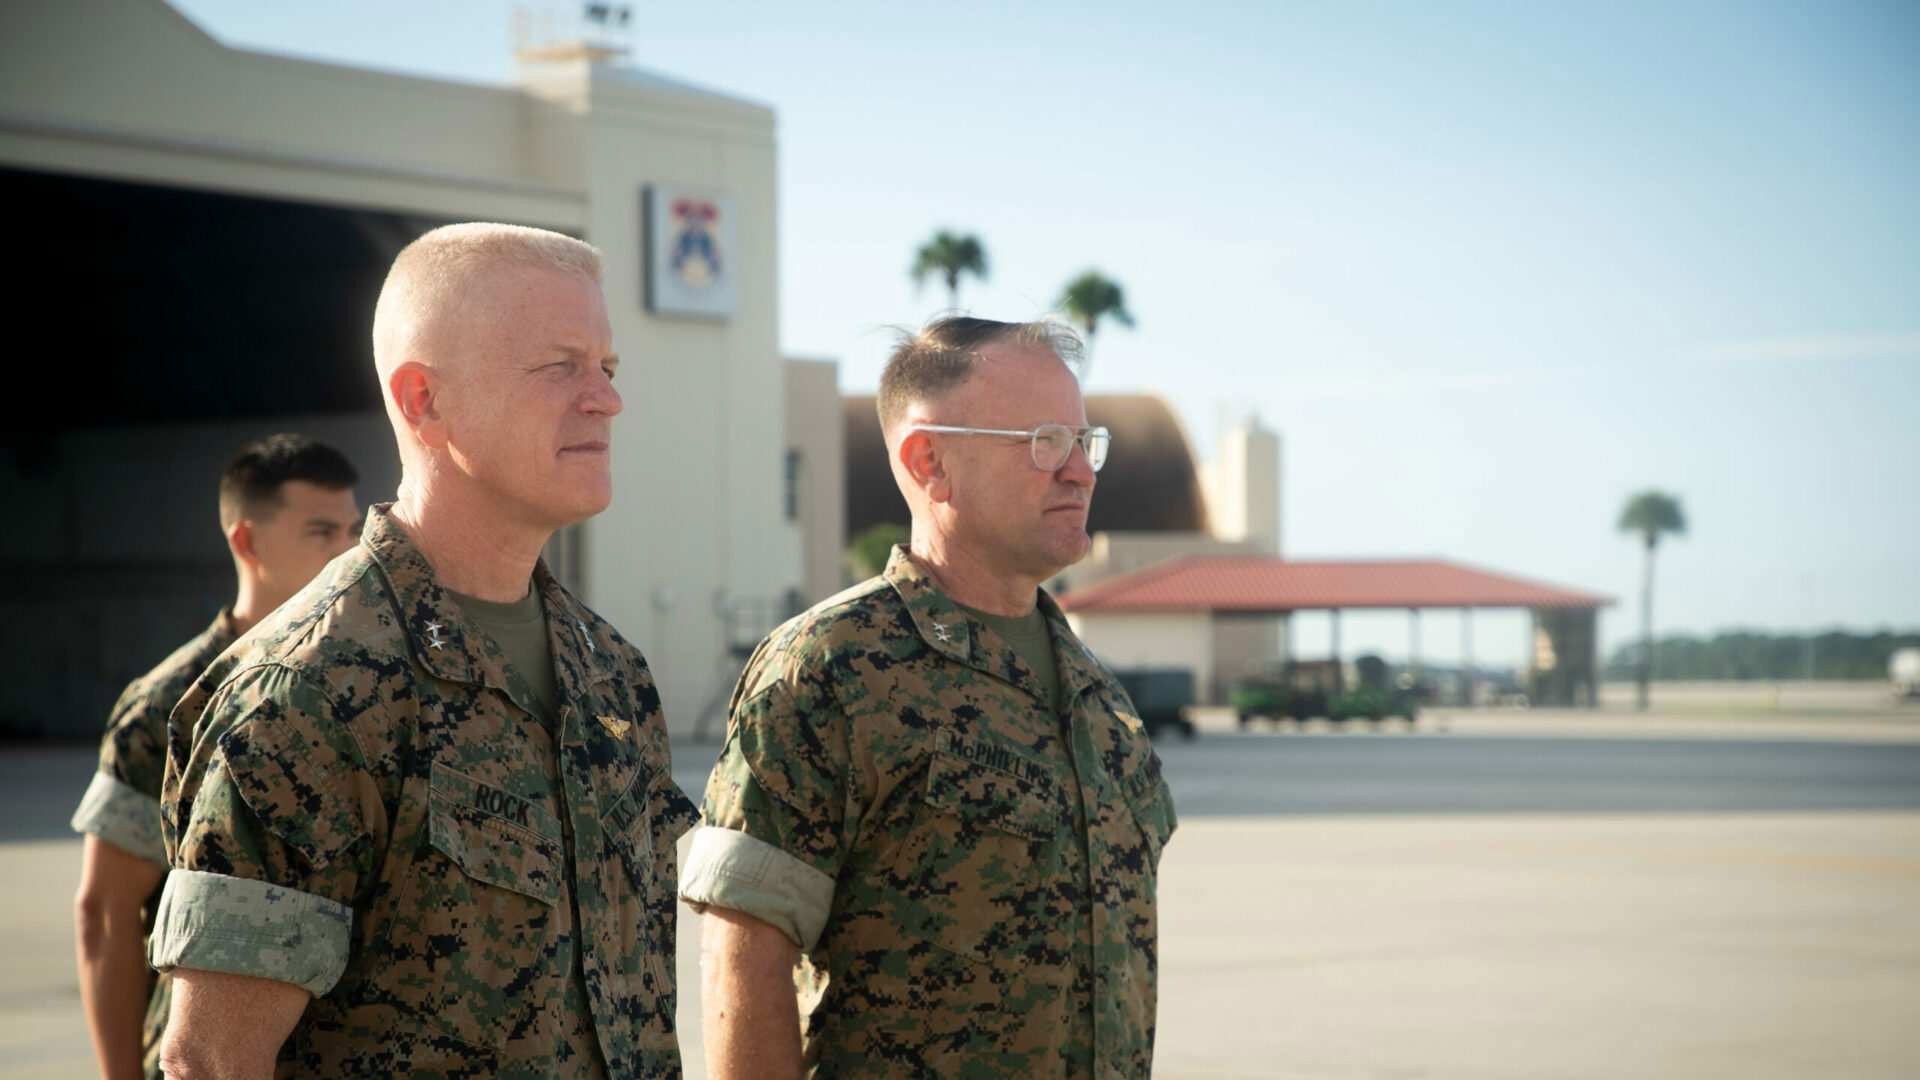 Cancelation of Marine Corps Ball: Unforeseen Operational Commitments Take Precedence...